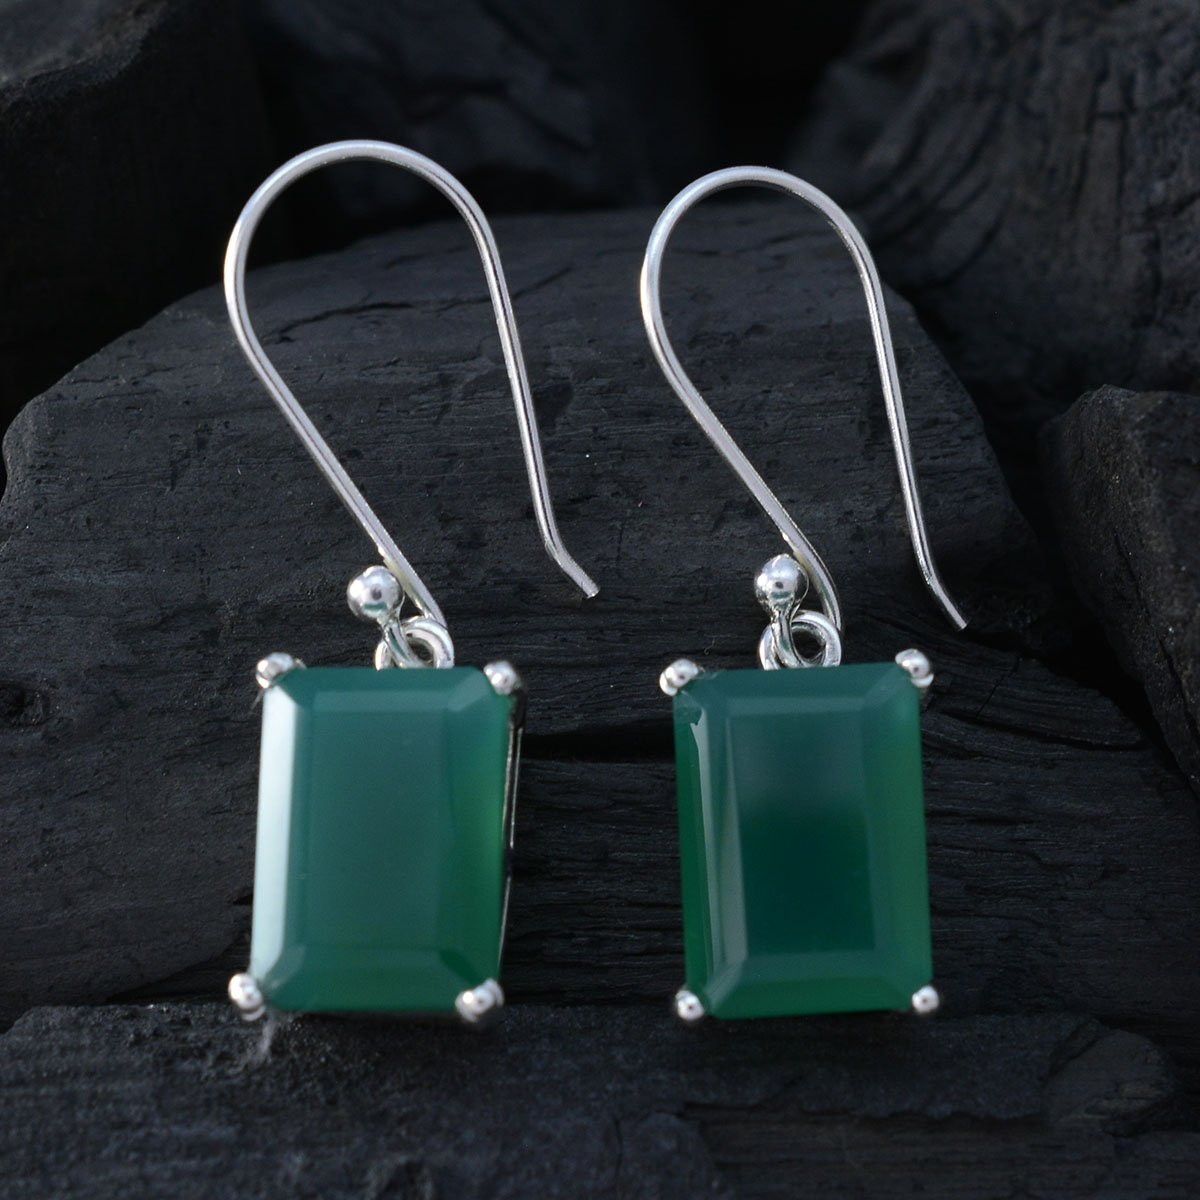 Riyo Good Gemstones Octogon Faceted Green Onyx Silver Earrings gift fordaughter day